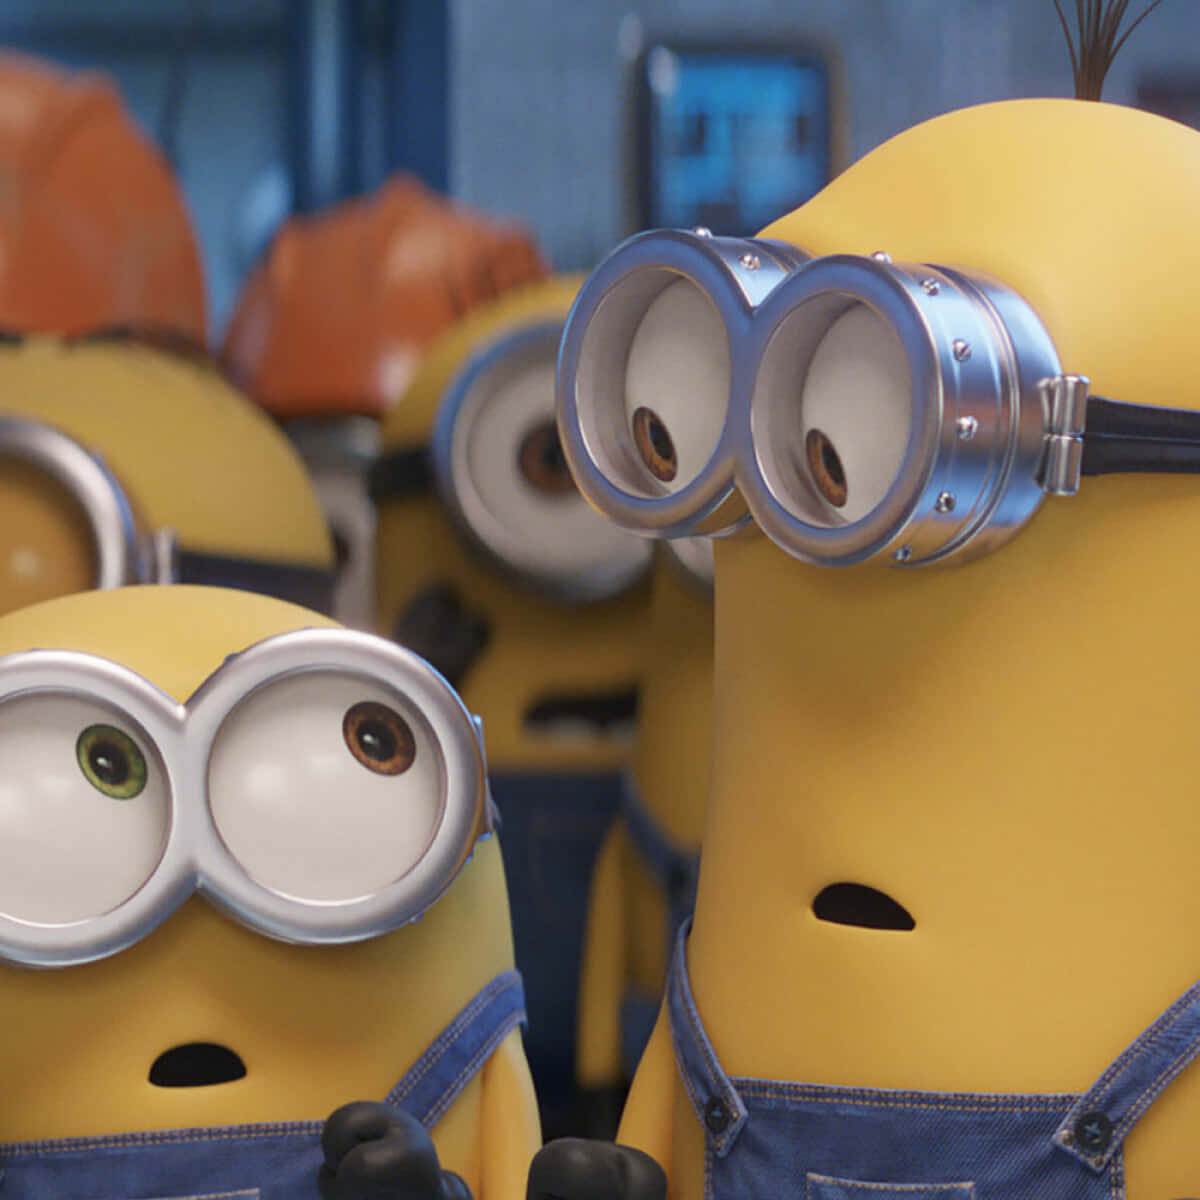 Fewer things are cuter than Minions, but they’re much more than just adorable!